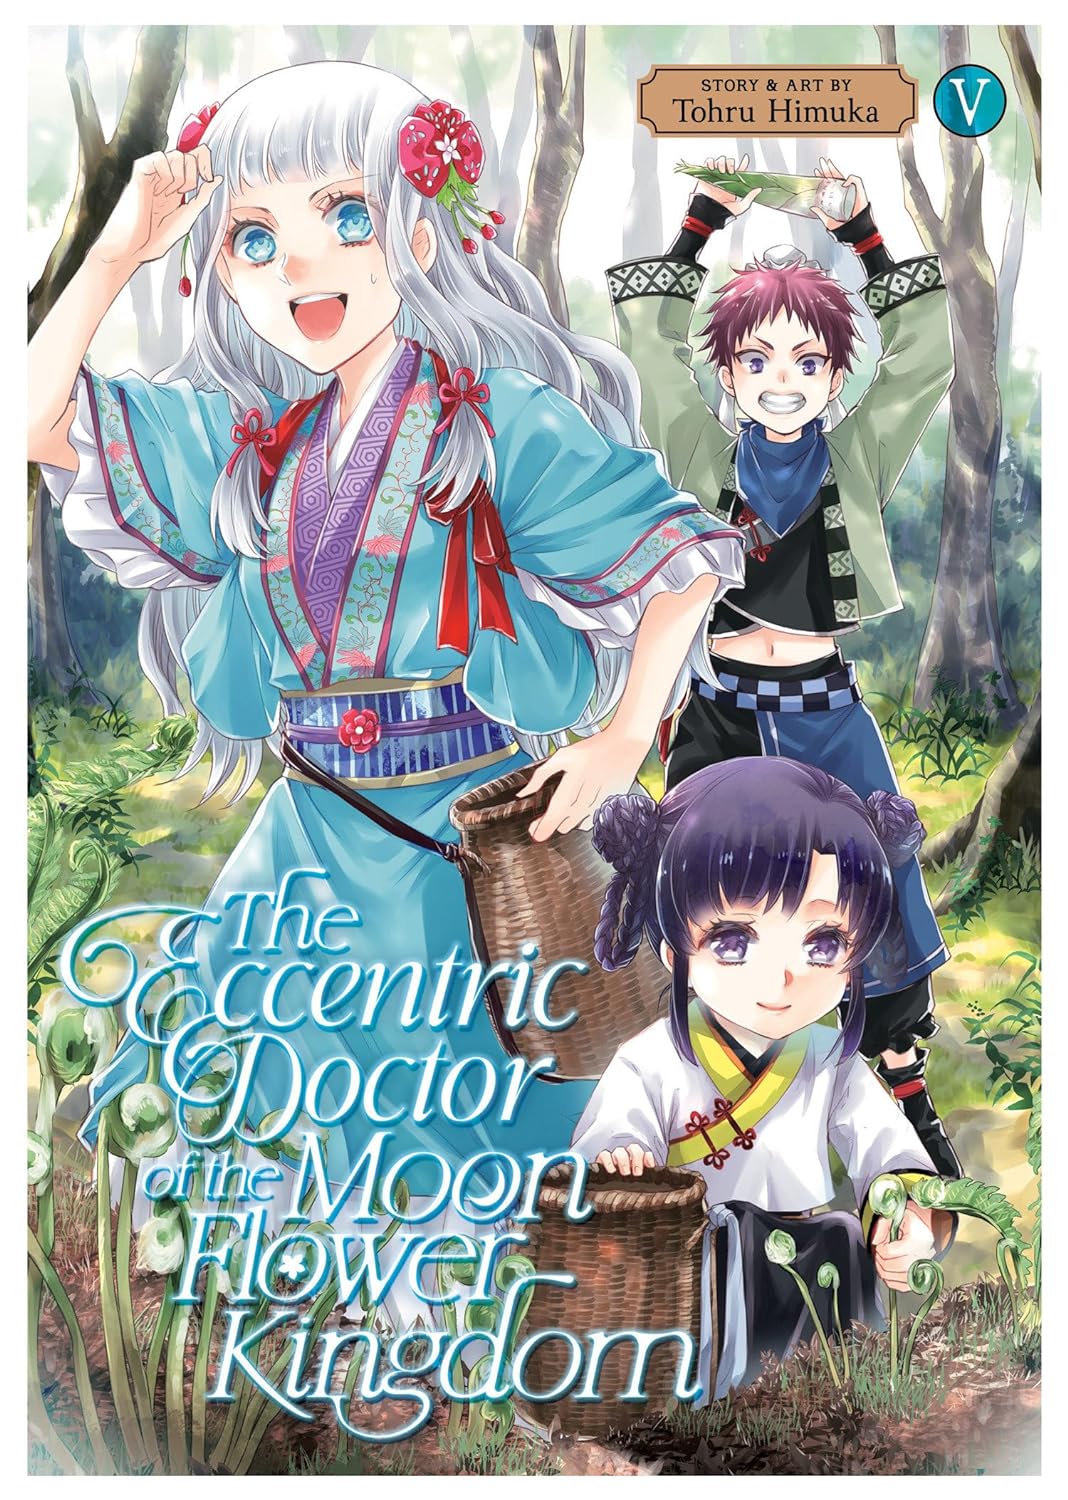 The Eccentric Doctor of the Moon Flower Kingdom Vol. 05